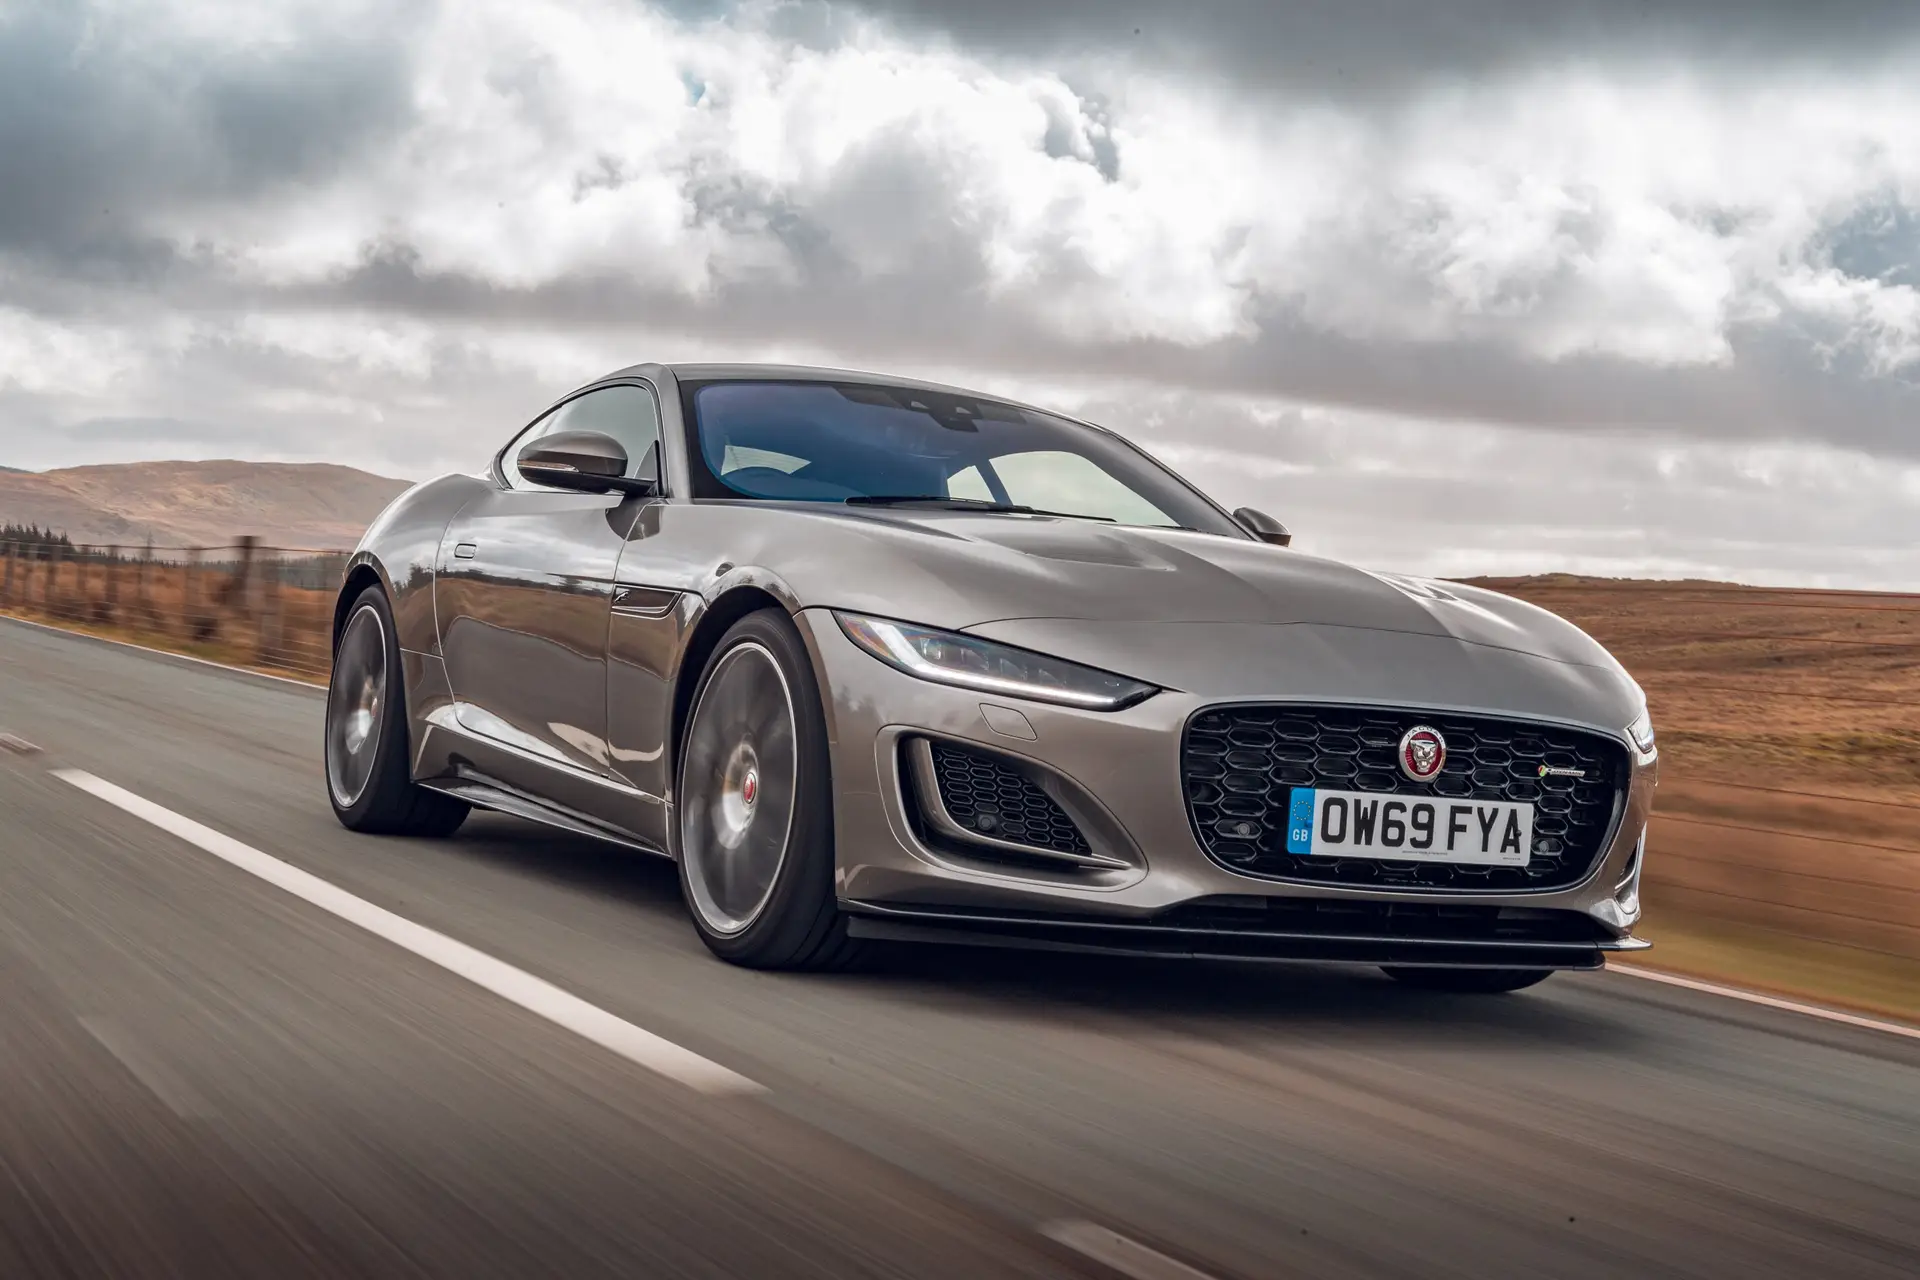 Jaguar F-Type Review 2023: exterior front three quarter photo of the Jaguar F-Type on the road